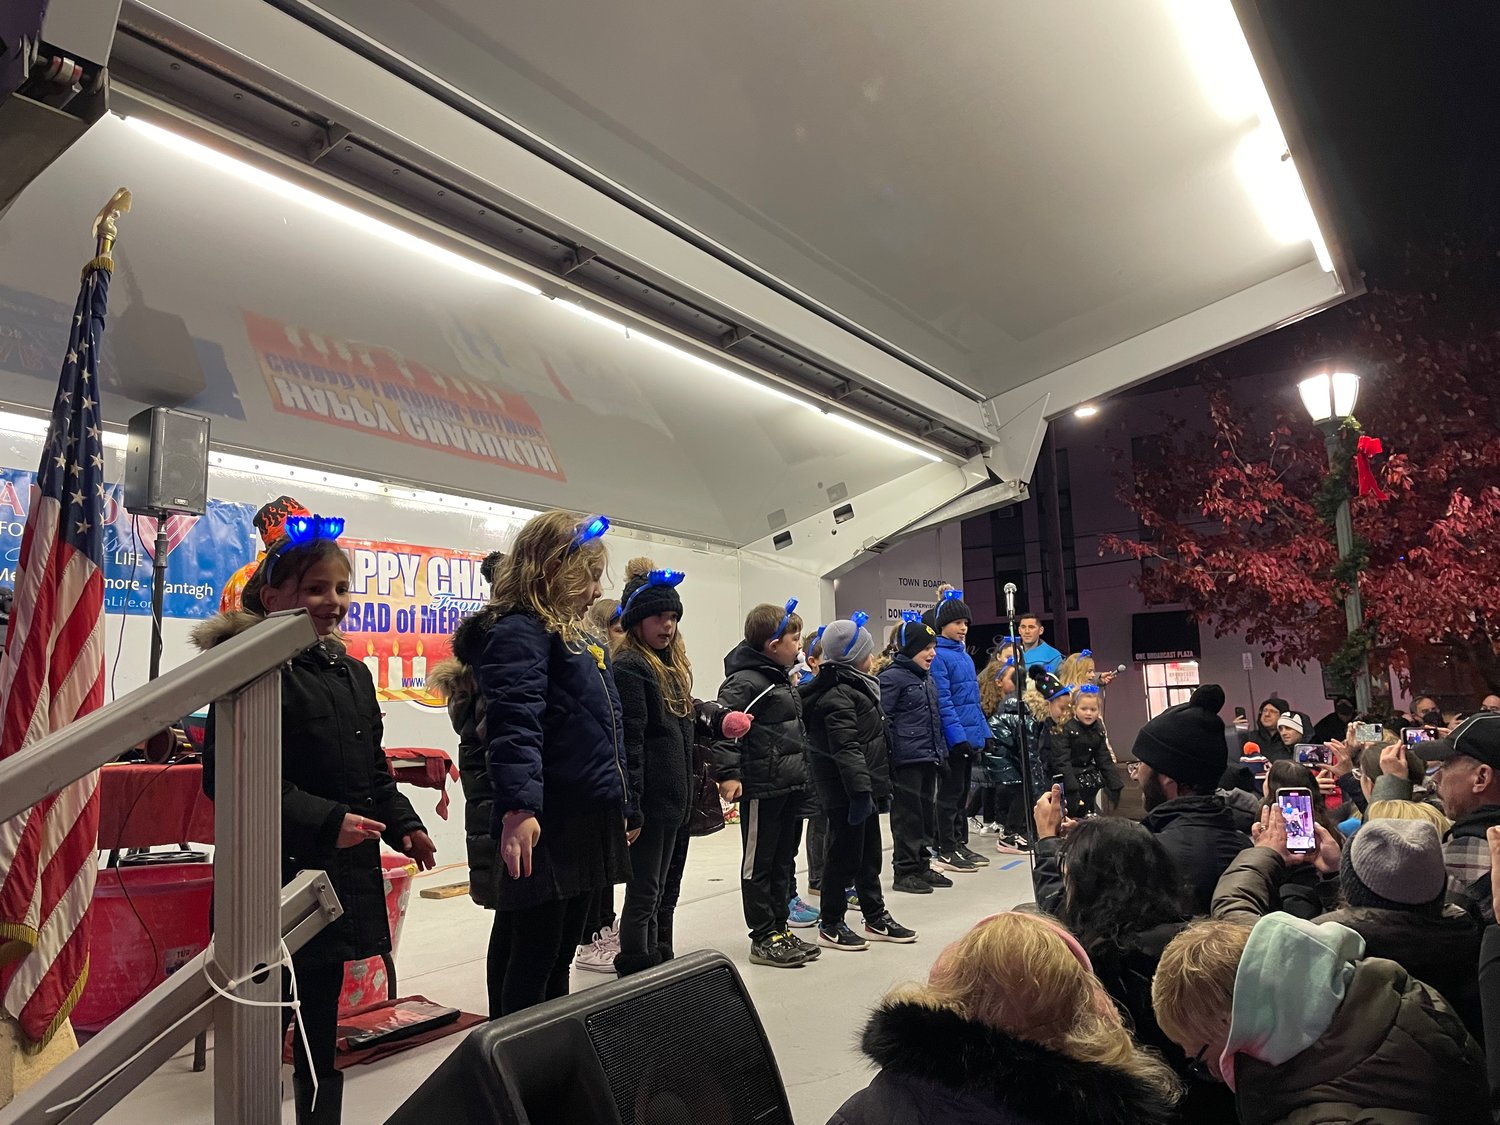 Chabad Center Hebrew School students staged a fun song-and-dance performance after the menorah was lit.